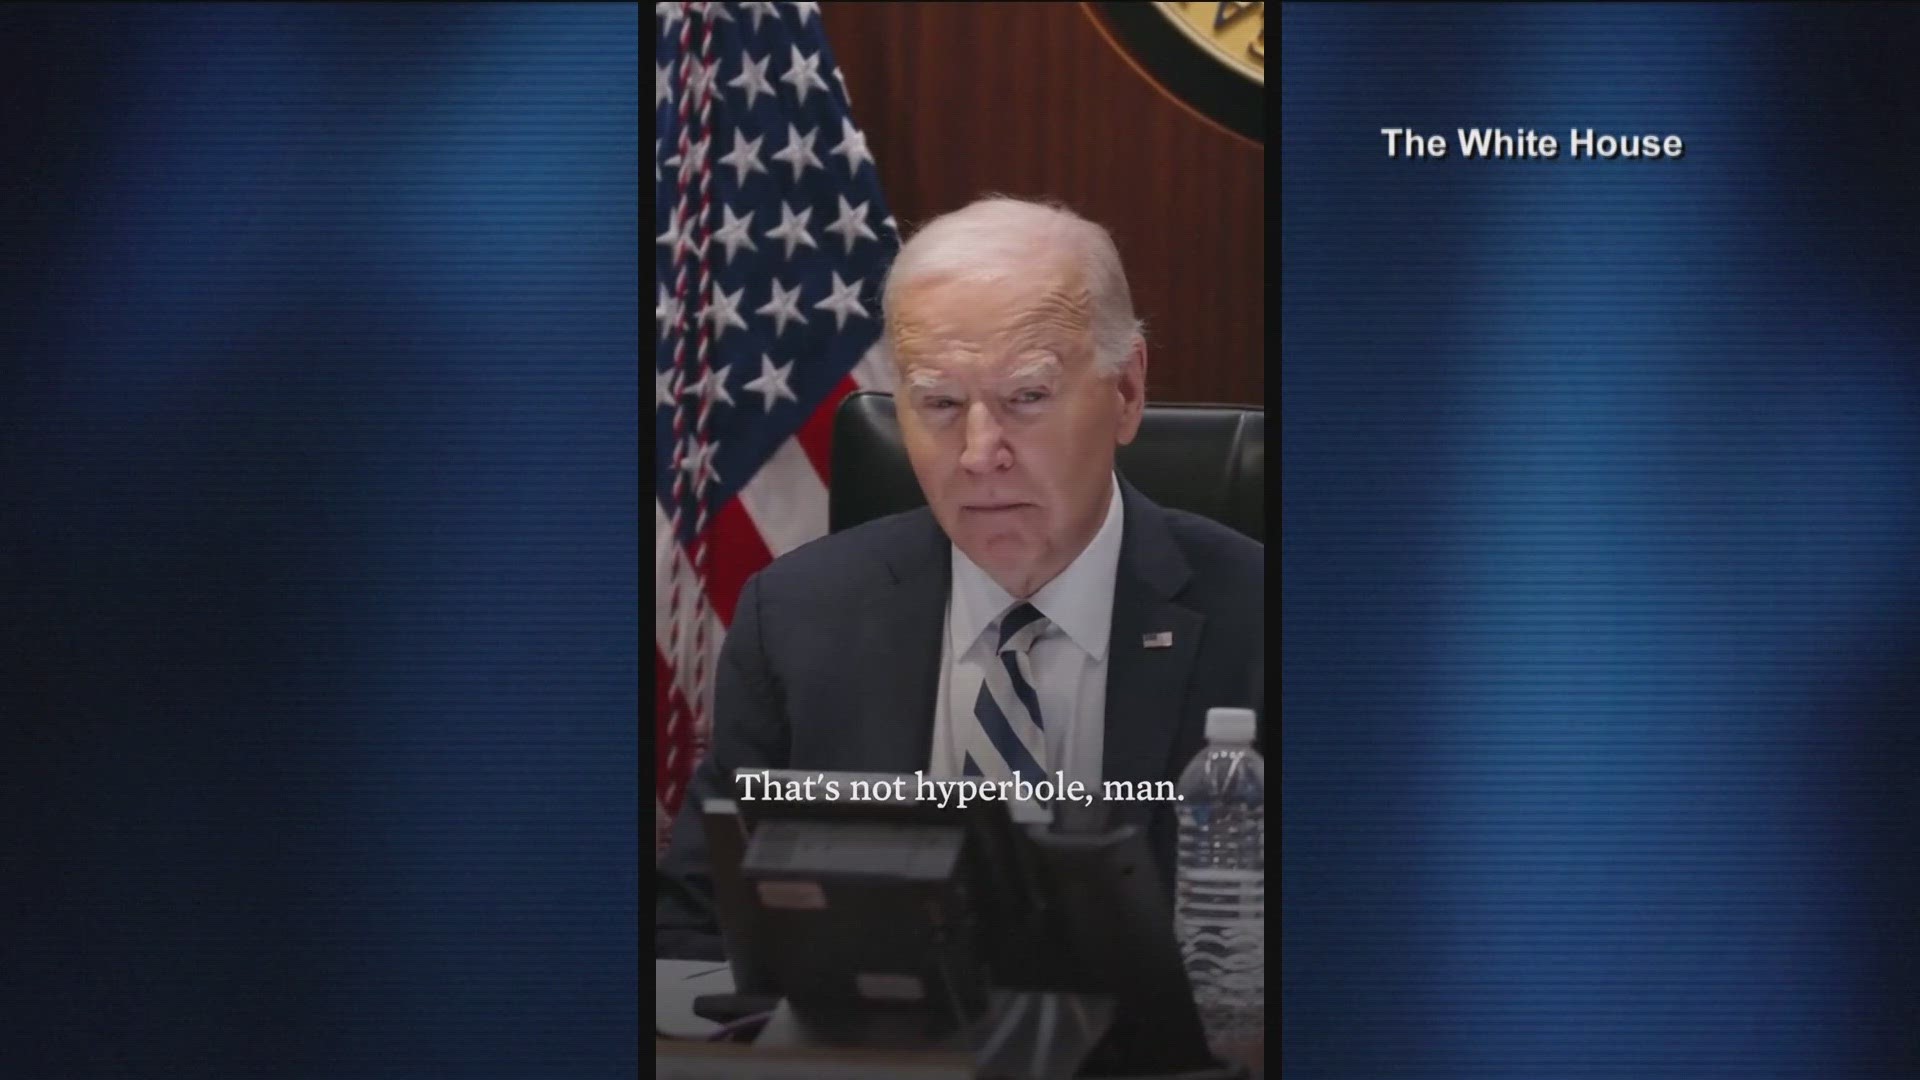 Biden noted note that their brave actions quote "make us all proud."